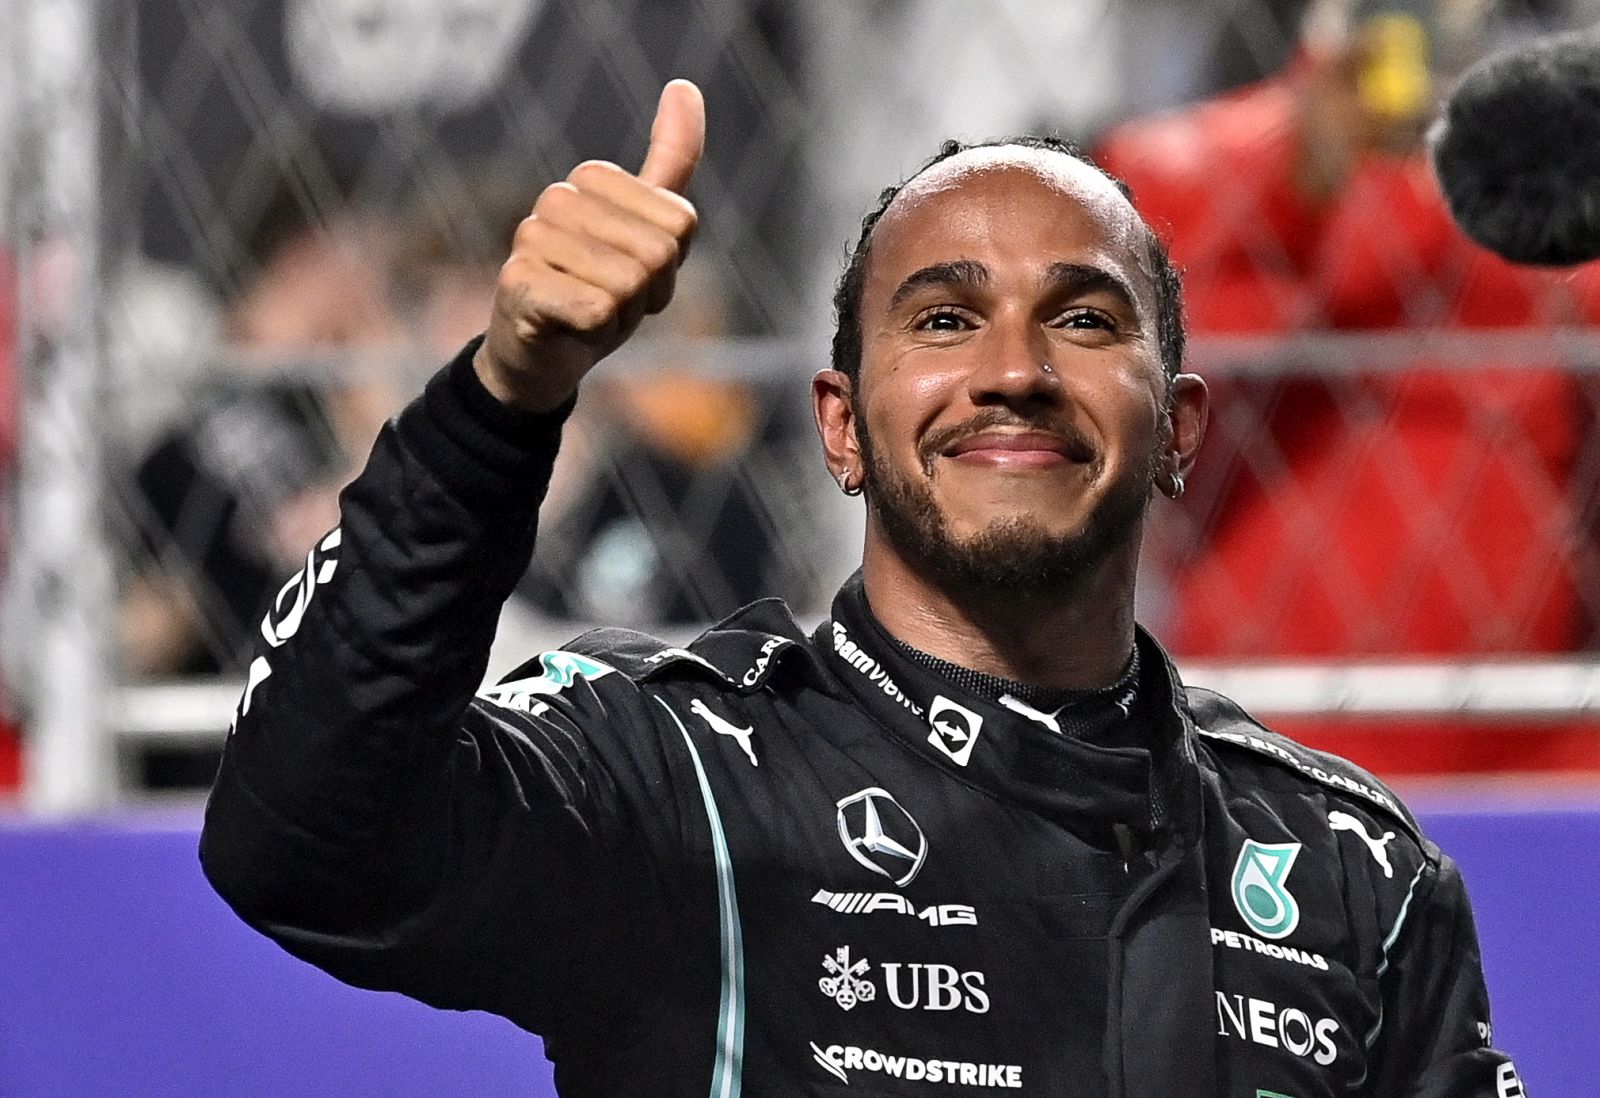 epa09621927 British Formula One driver Lewis Hamilton of Mercedes-AMG Petronas celebrates at parc ferme after taking the pole position in the qualifying for the 2021 Formula One Grand Prix of Saudi Arabia at the Jeddah Corniche Circuit in Jeddah, Saudi Arabia, 04 December 2021. The inaugural Formula One Grand Prix of Saudi Arabia will take place on 05 December 2021.  EPA/STR